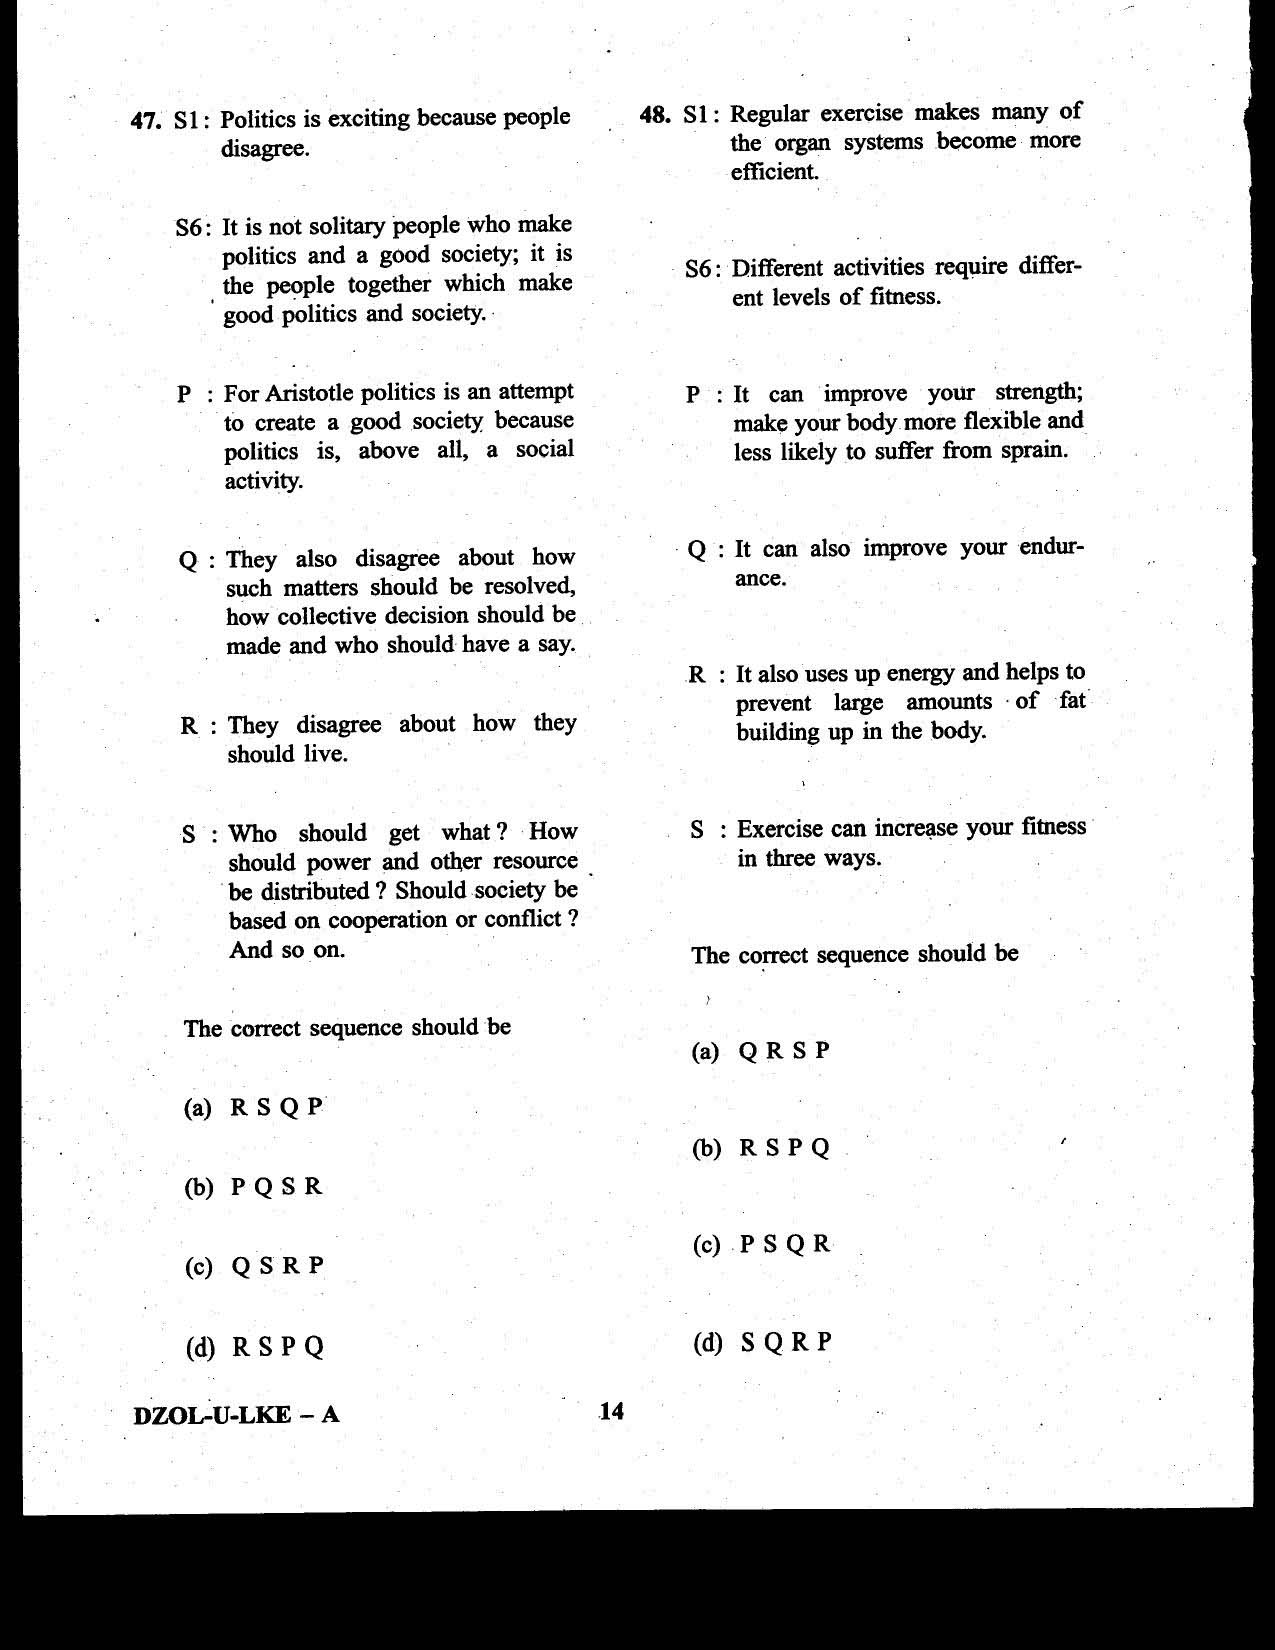 CDS II Examination 2020 English Question Paper - Image 14